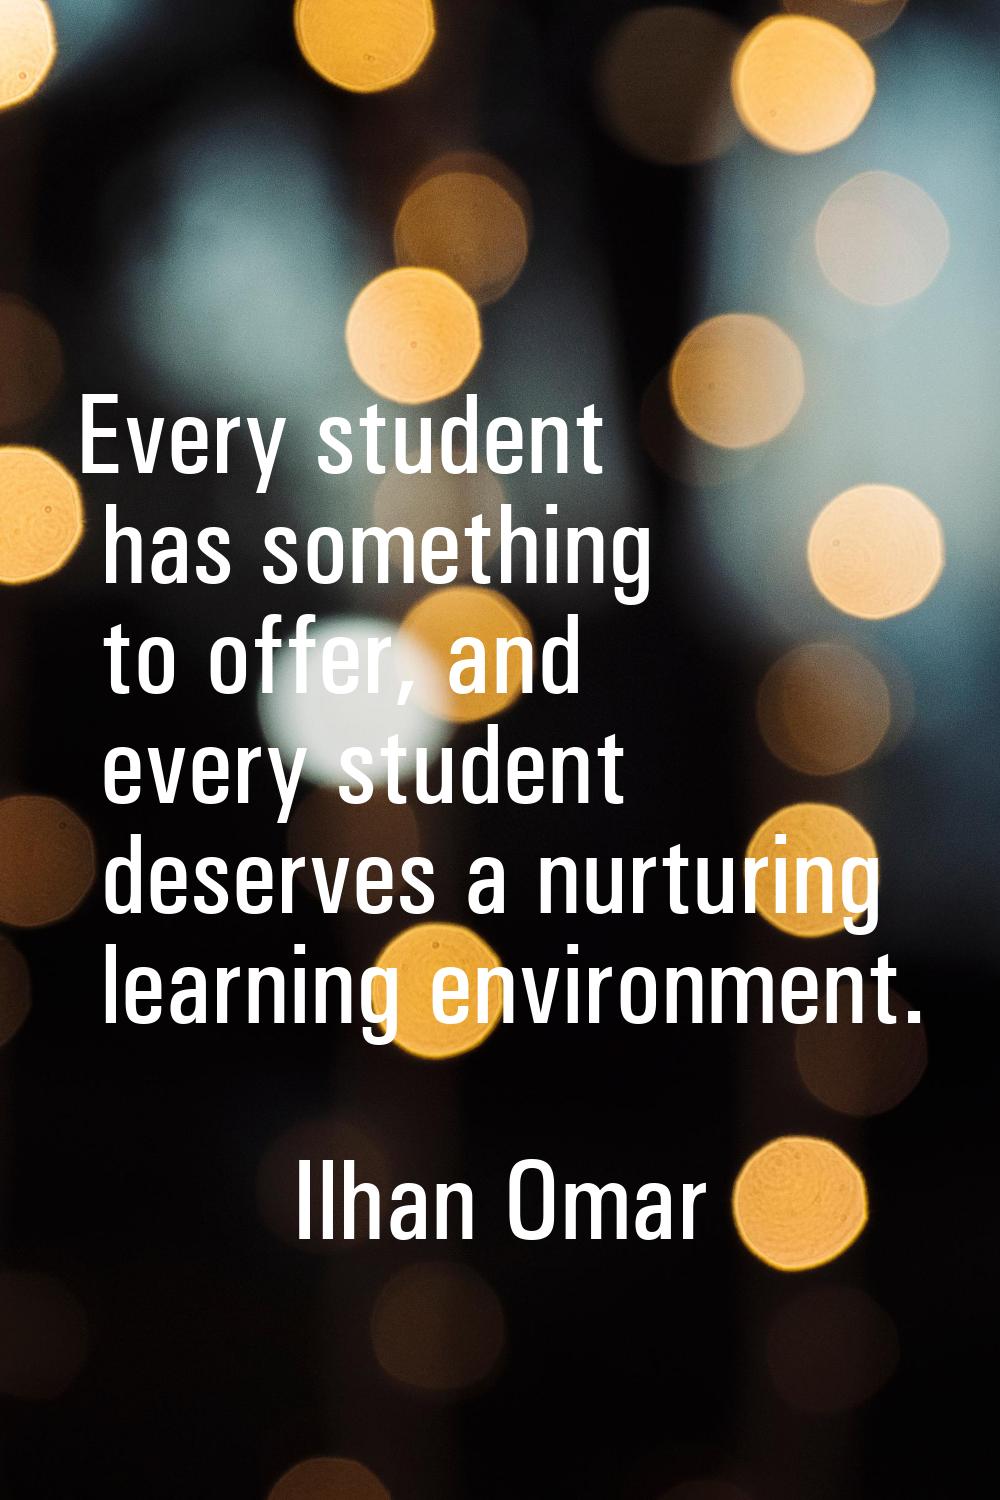 Every student has something to offer, and every student deserves a nurturing learning environment.